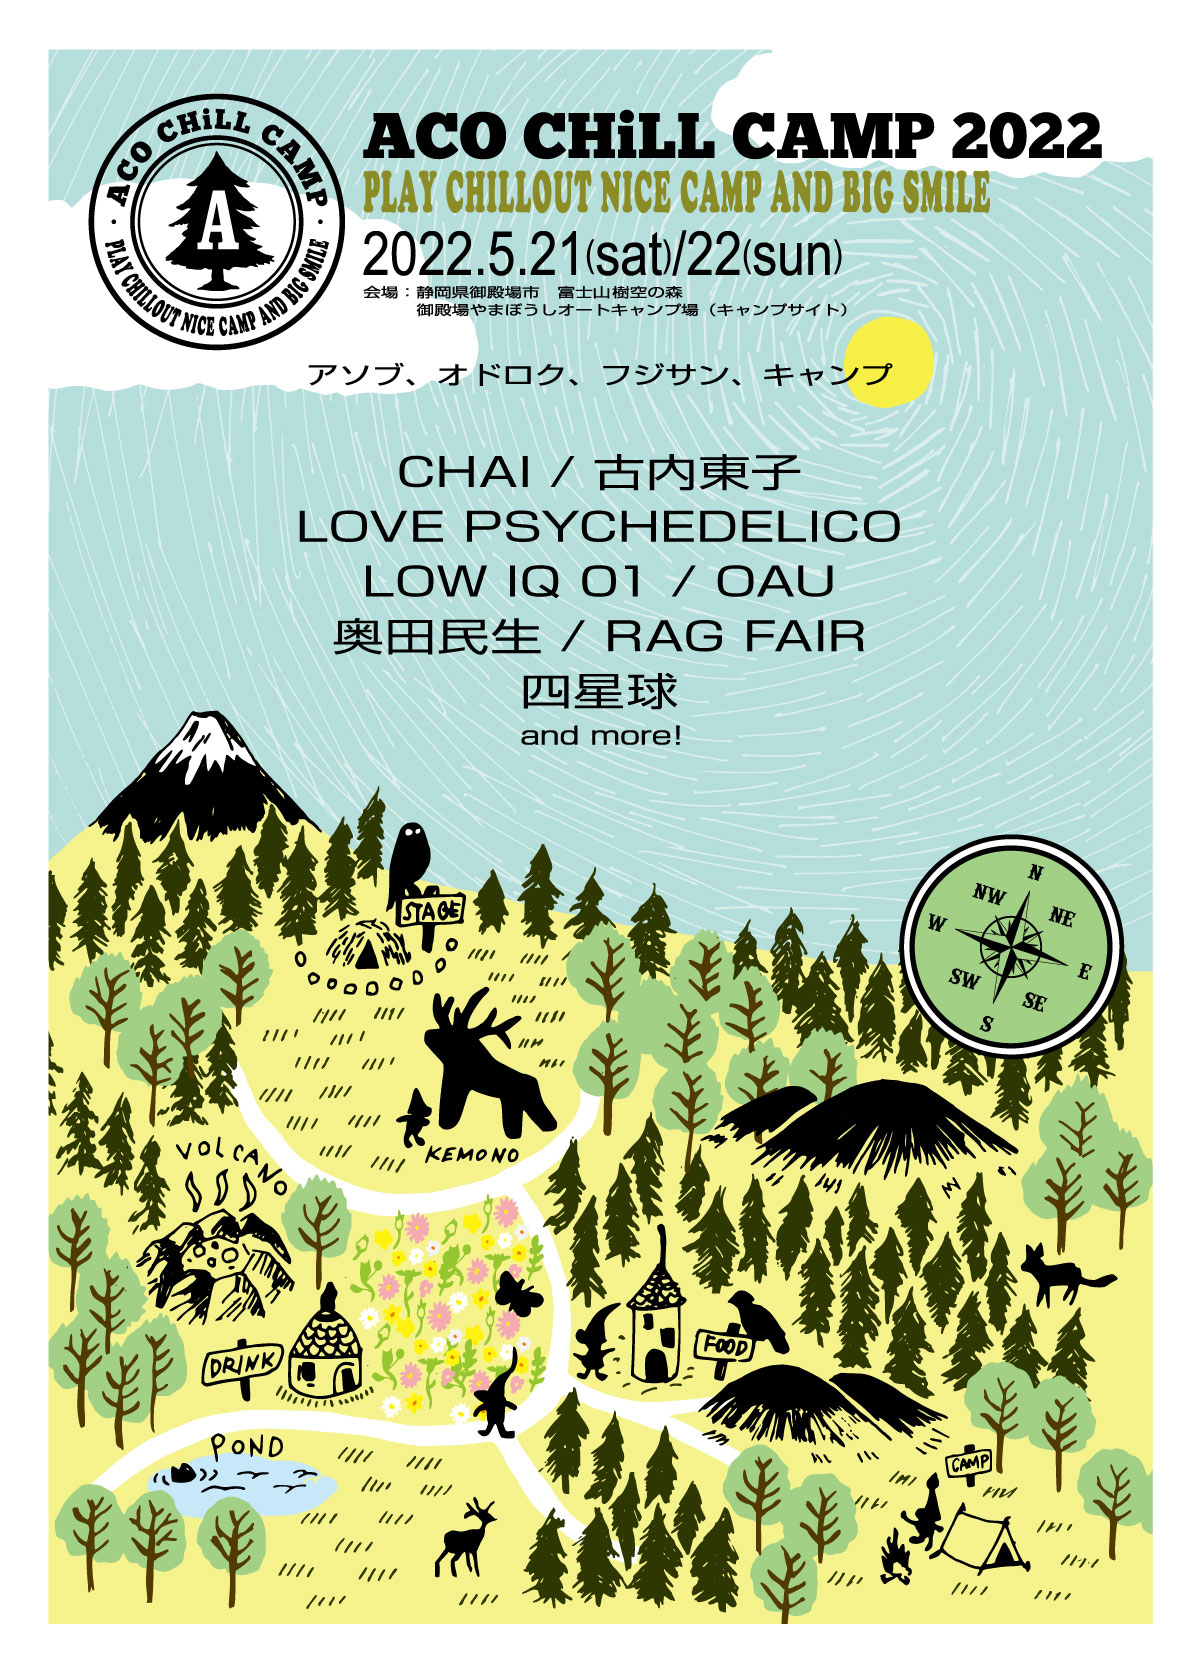 Aco Chill Camp 22 第1弾アーティストで奥田民生 Love Psychedelico Chai 四星球 Low Iq 01 Oauら発表